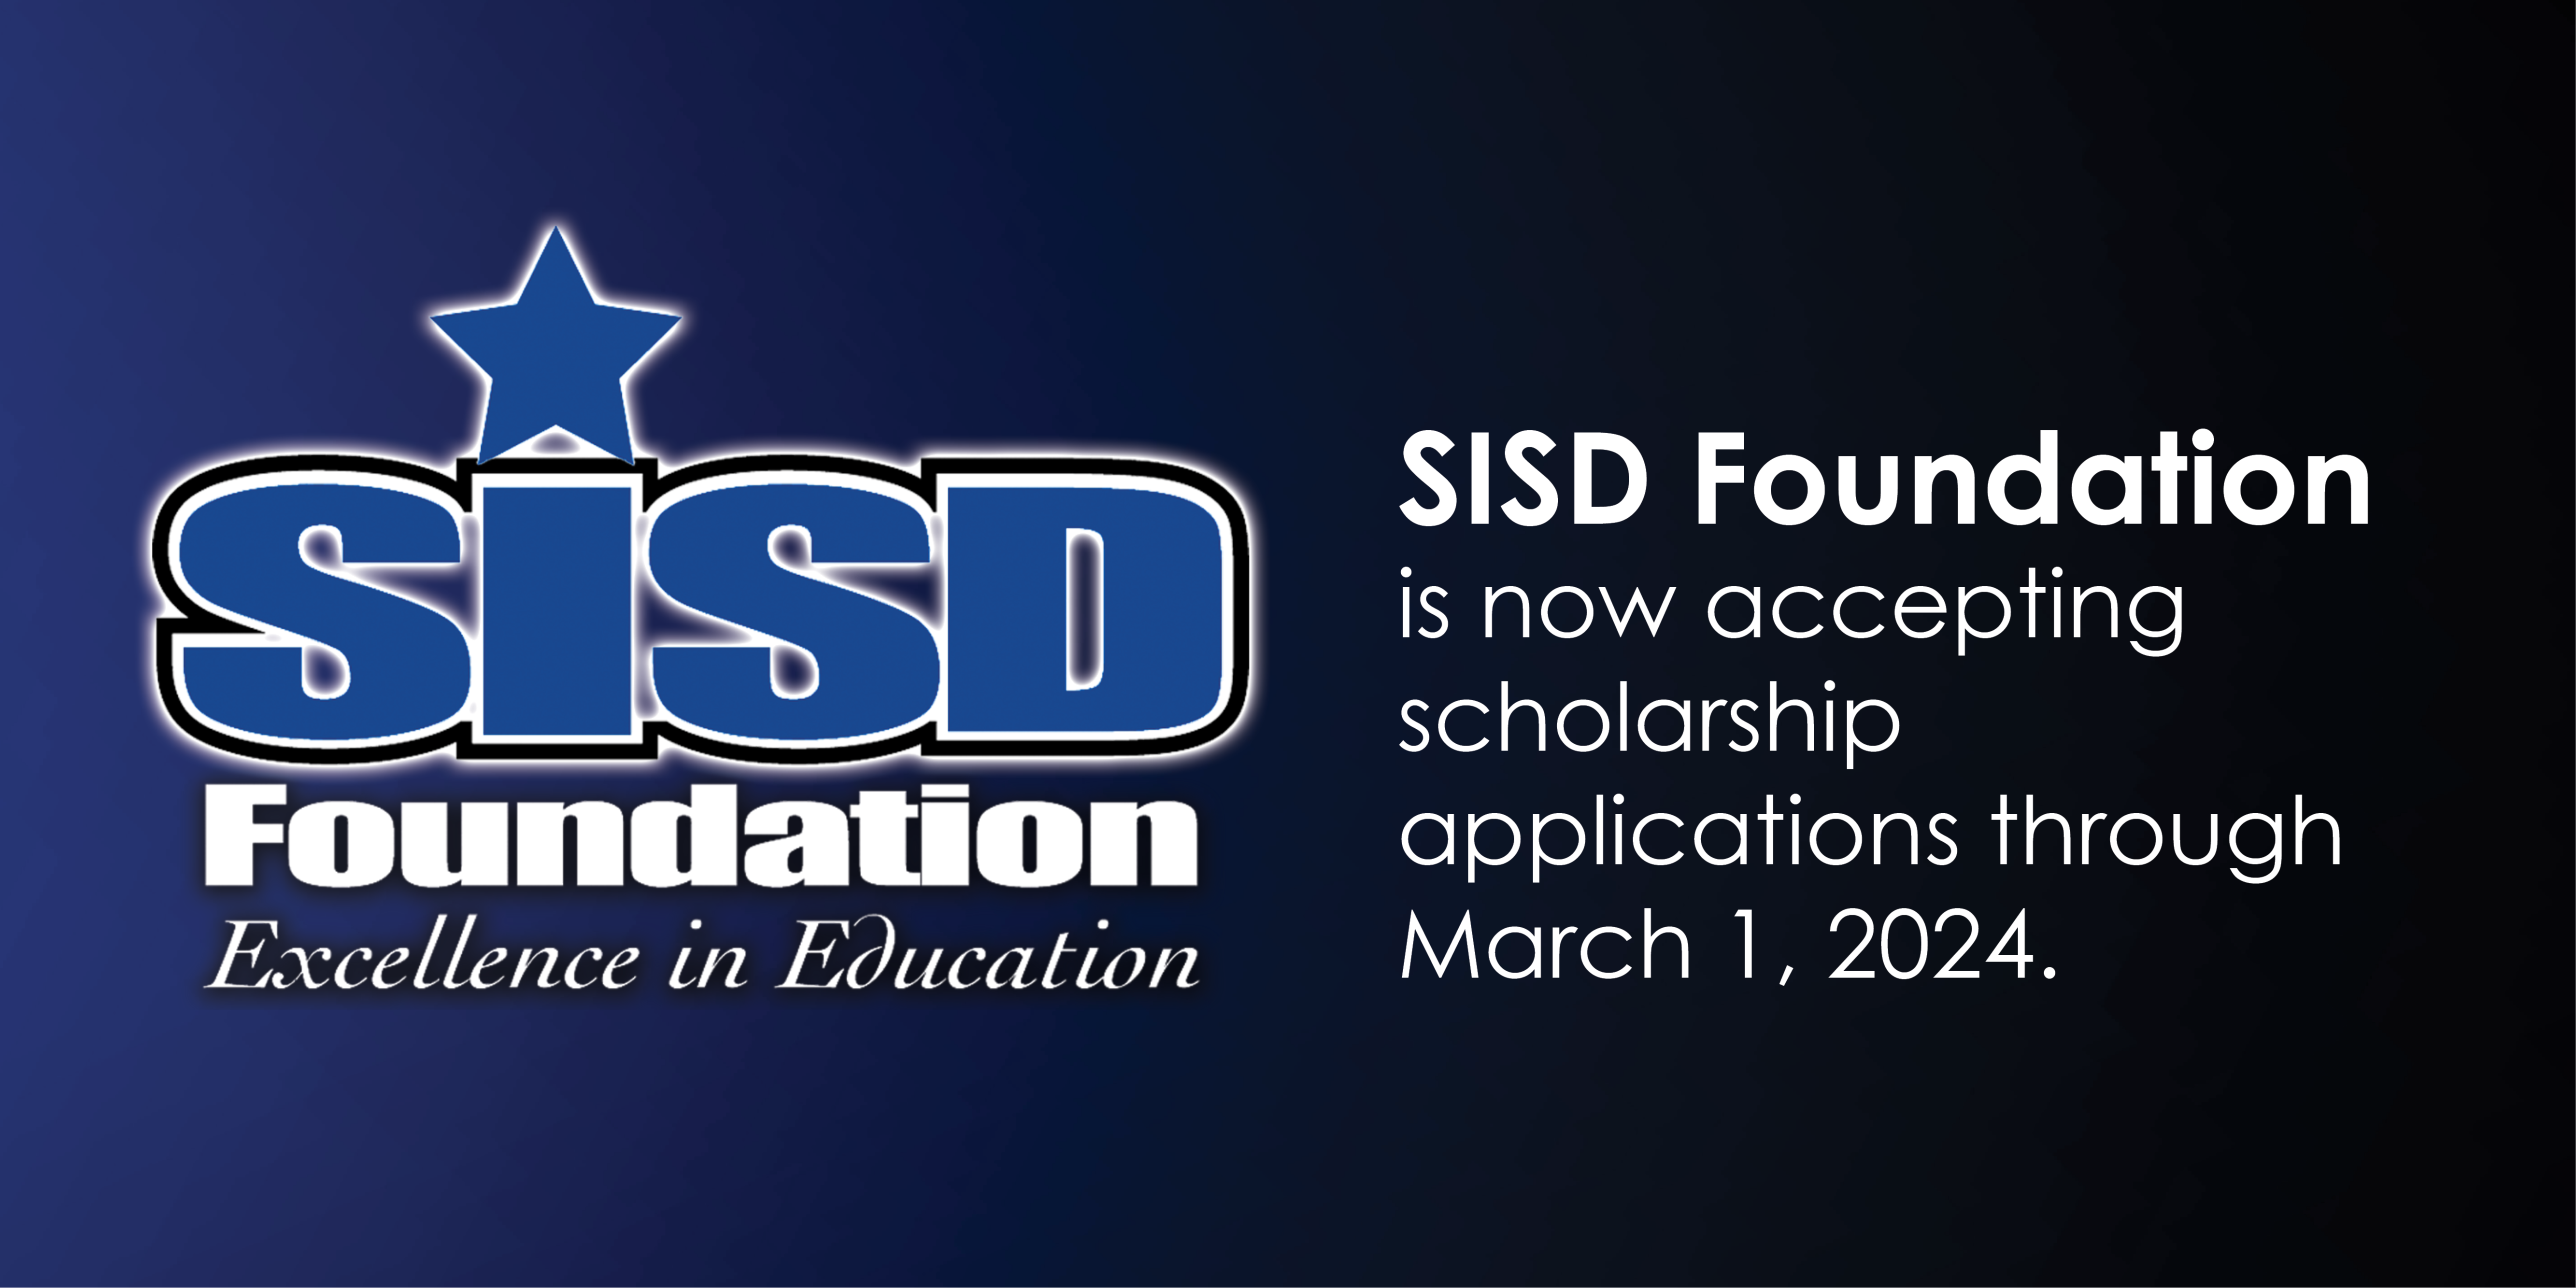 SISD Foundation is now accepting scholarship 